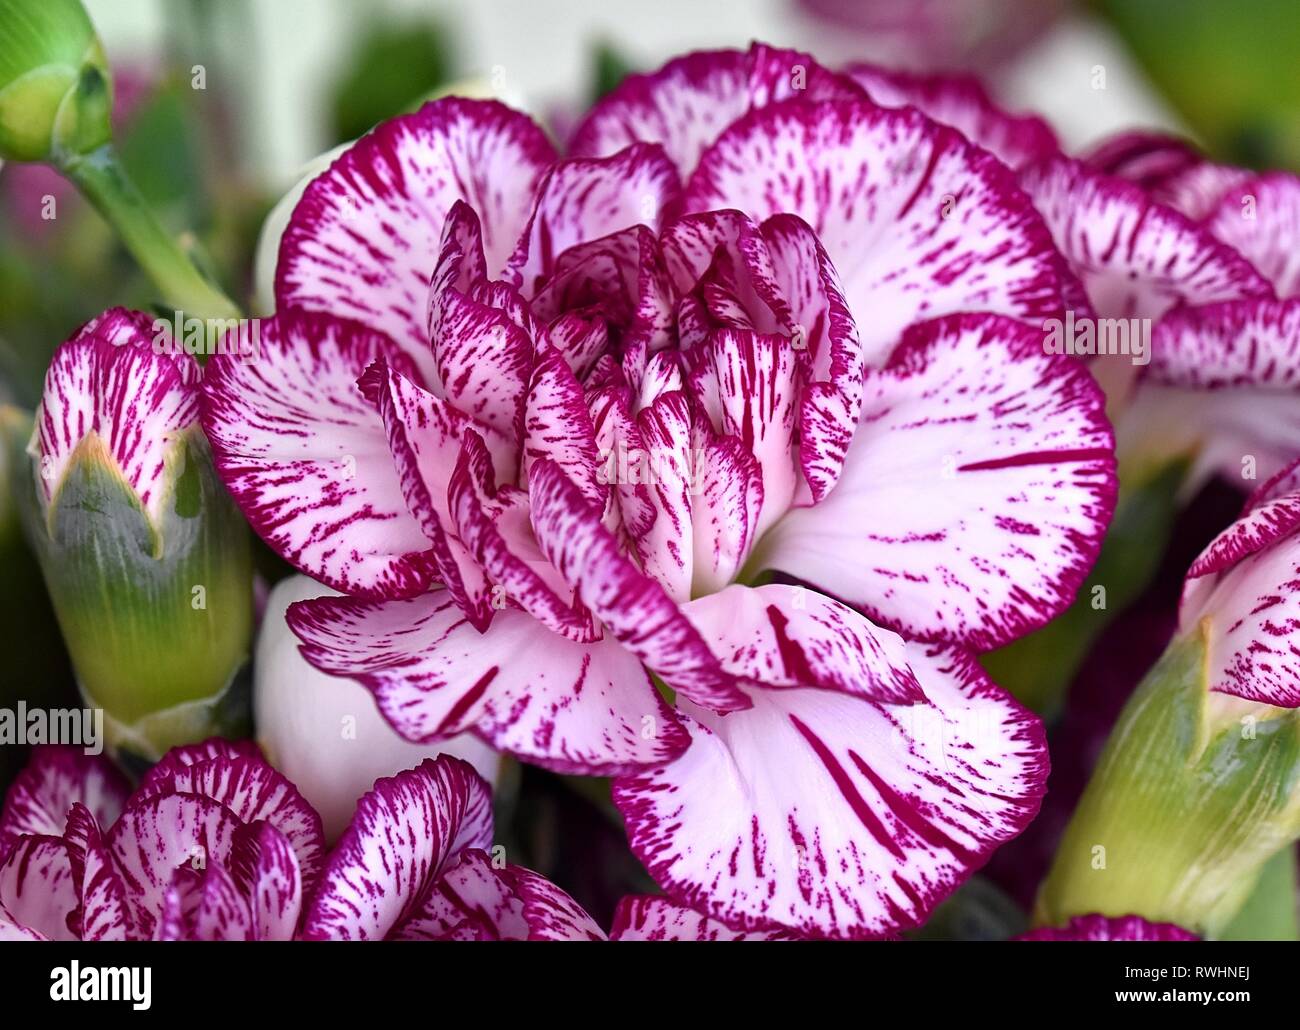 Purple and white variegated carnations. Stock Photo